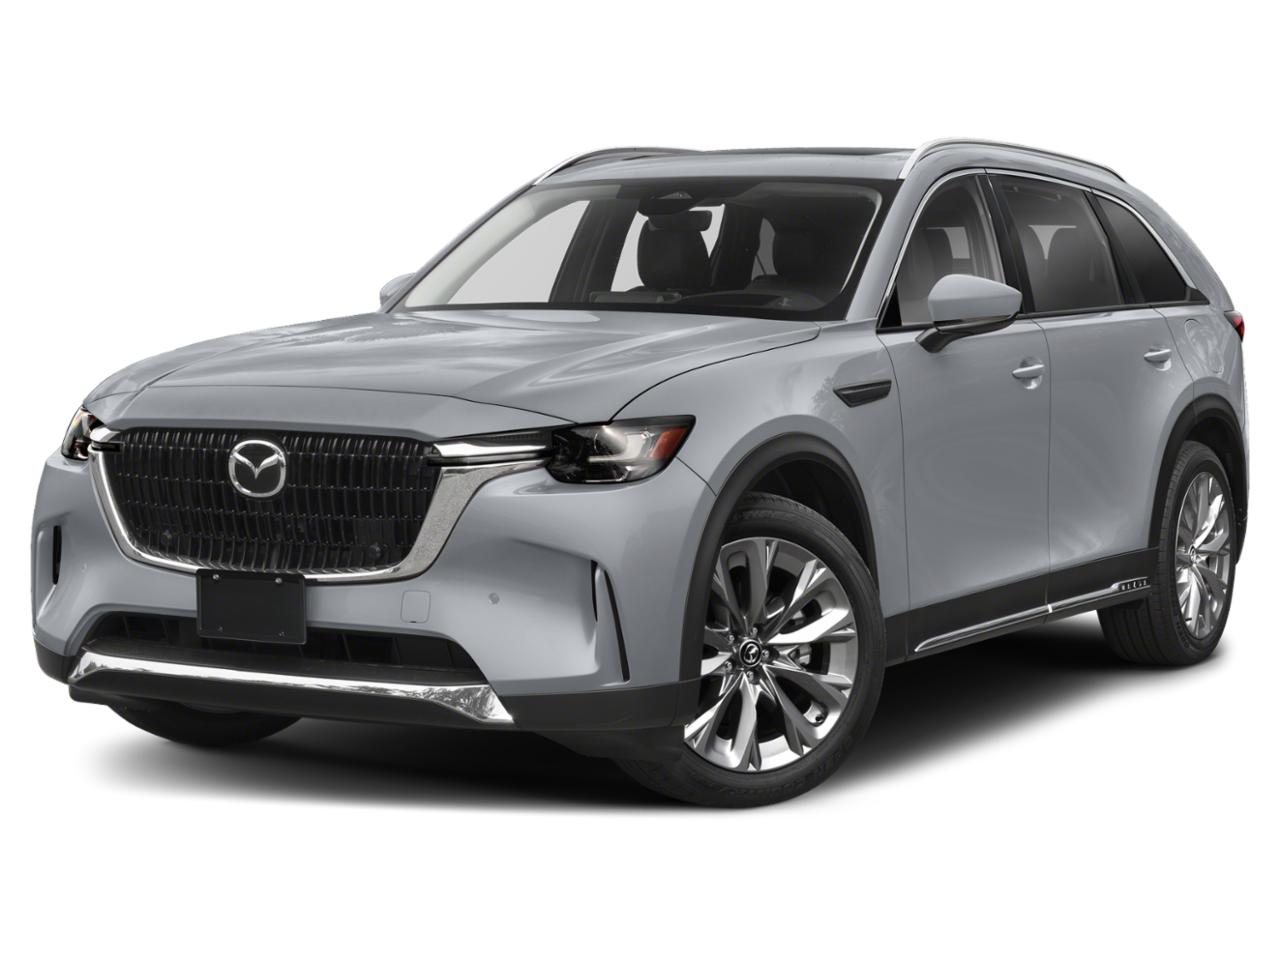 Experience the Mazda CX-30 at our Bangor dealership